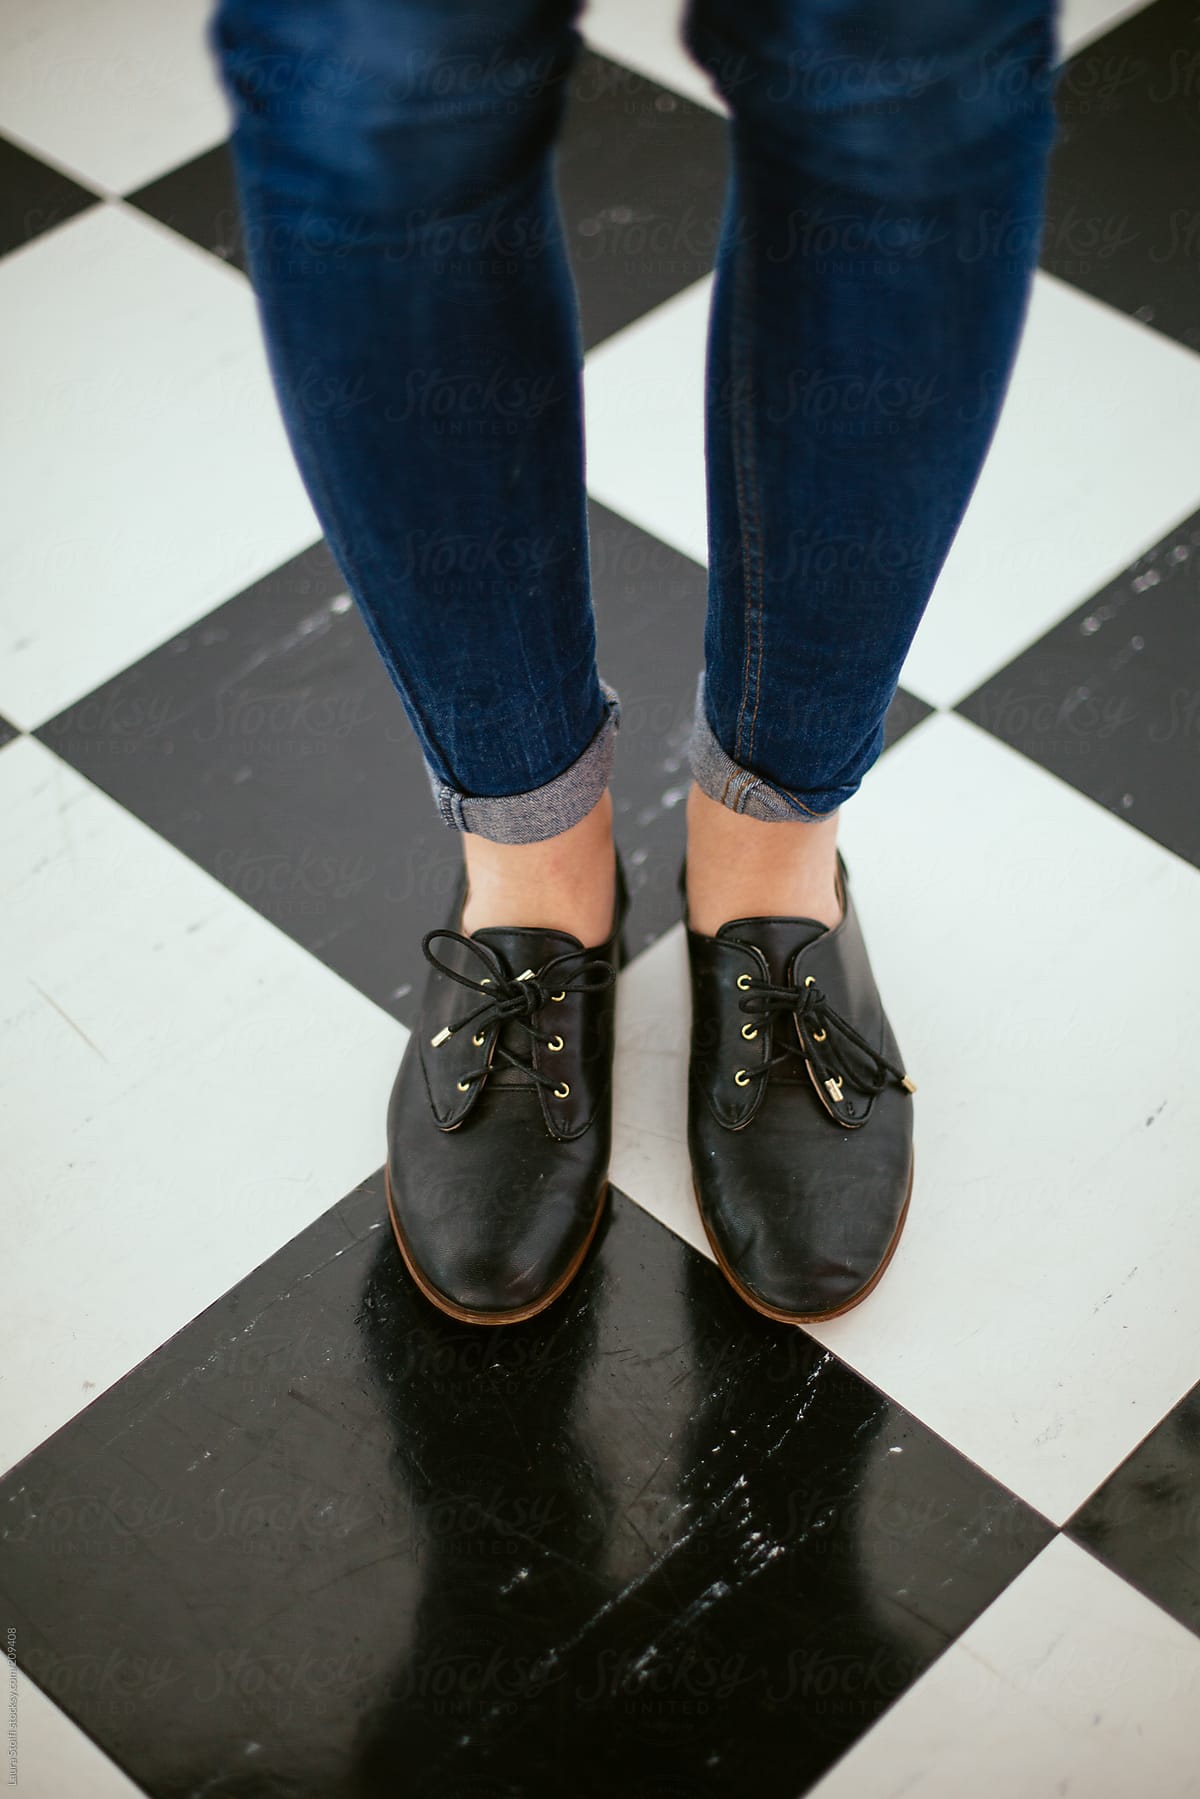 Girl wearing jeans and black leather lace-ups standing on checked flooring